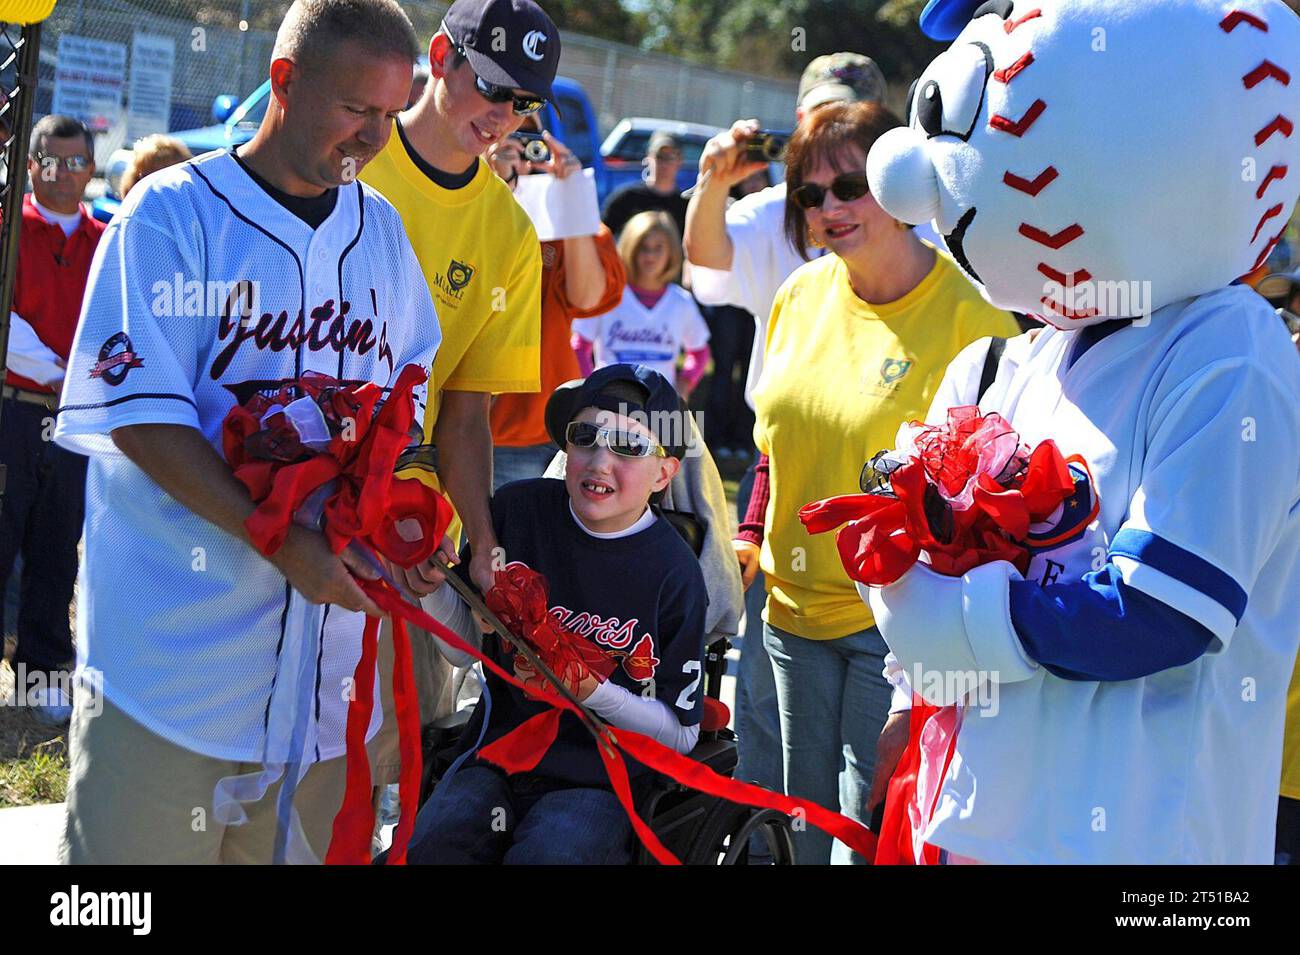 110722-N-YR391-024 CAMDEN COUNTY, Ga. (Oct. 22, 2011) Senior Chief Missile Technician Jeff Norris and the Miracle League mascot hold a ribbon for a child to cut and officially open the newly constructed Miracle Field in Camden County, Ga. Miracle Field is a specialized baseball field that will serve children with disabilities in Camden County and the surrounding areas. (U.S. Navy photo by Mass Communication Specialist 2nd Class Gary Granger Jr./Released) Stock Photo